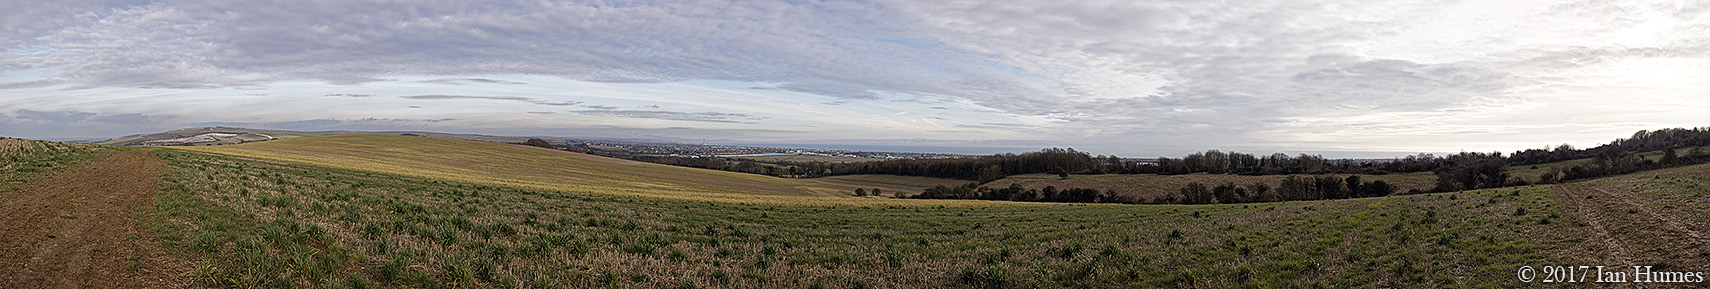 Lancing Hill - West Sussex